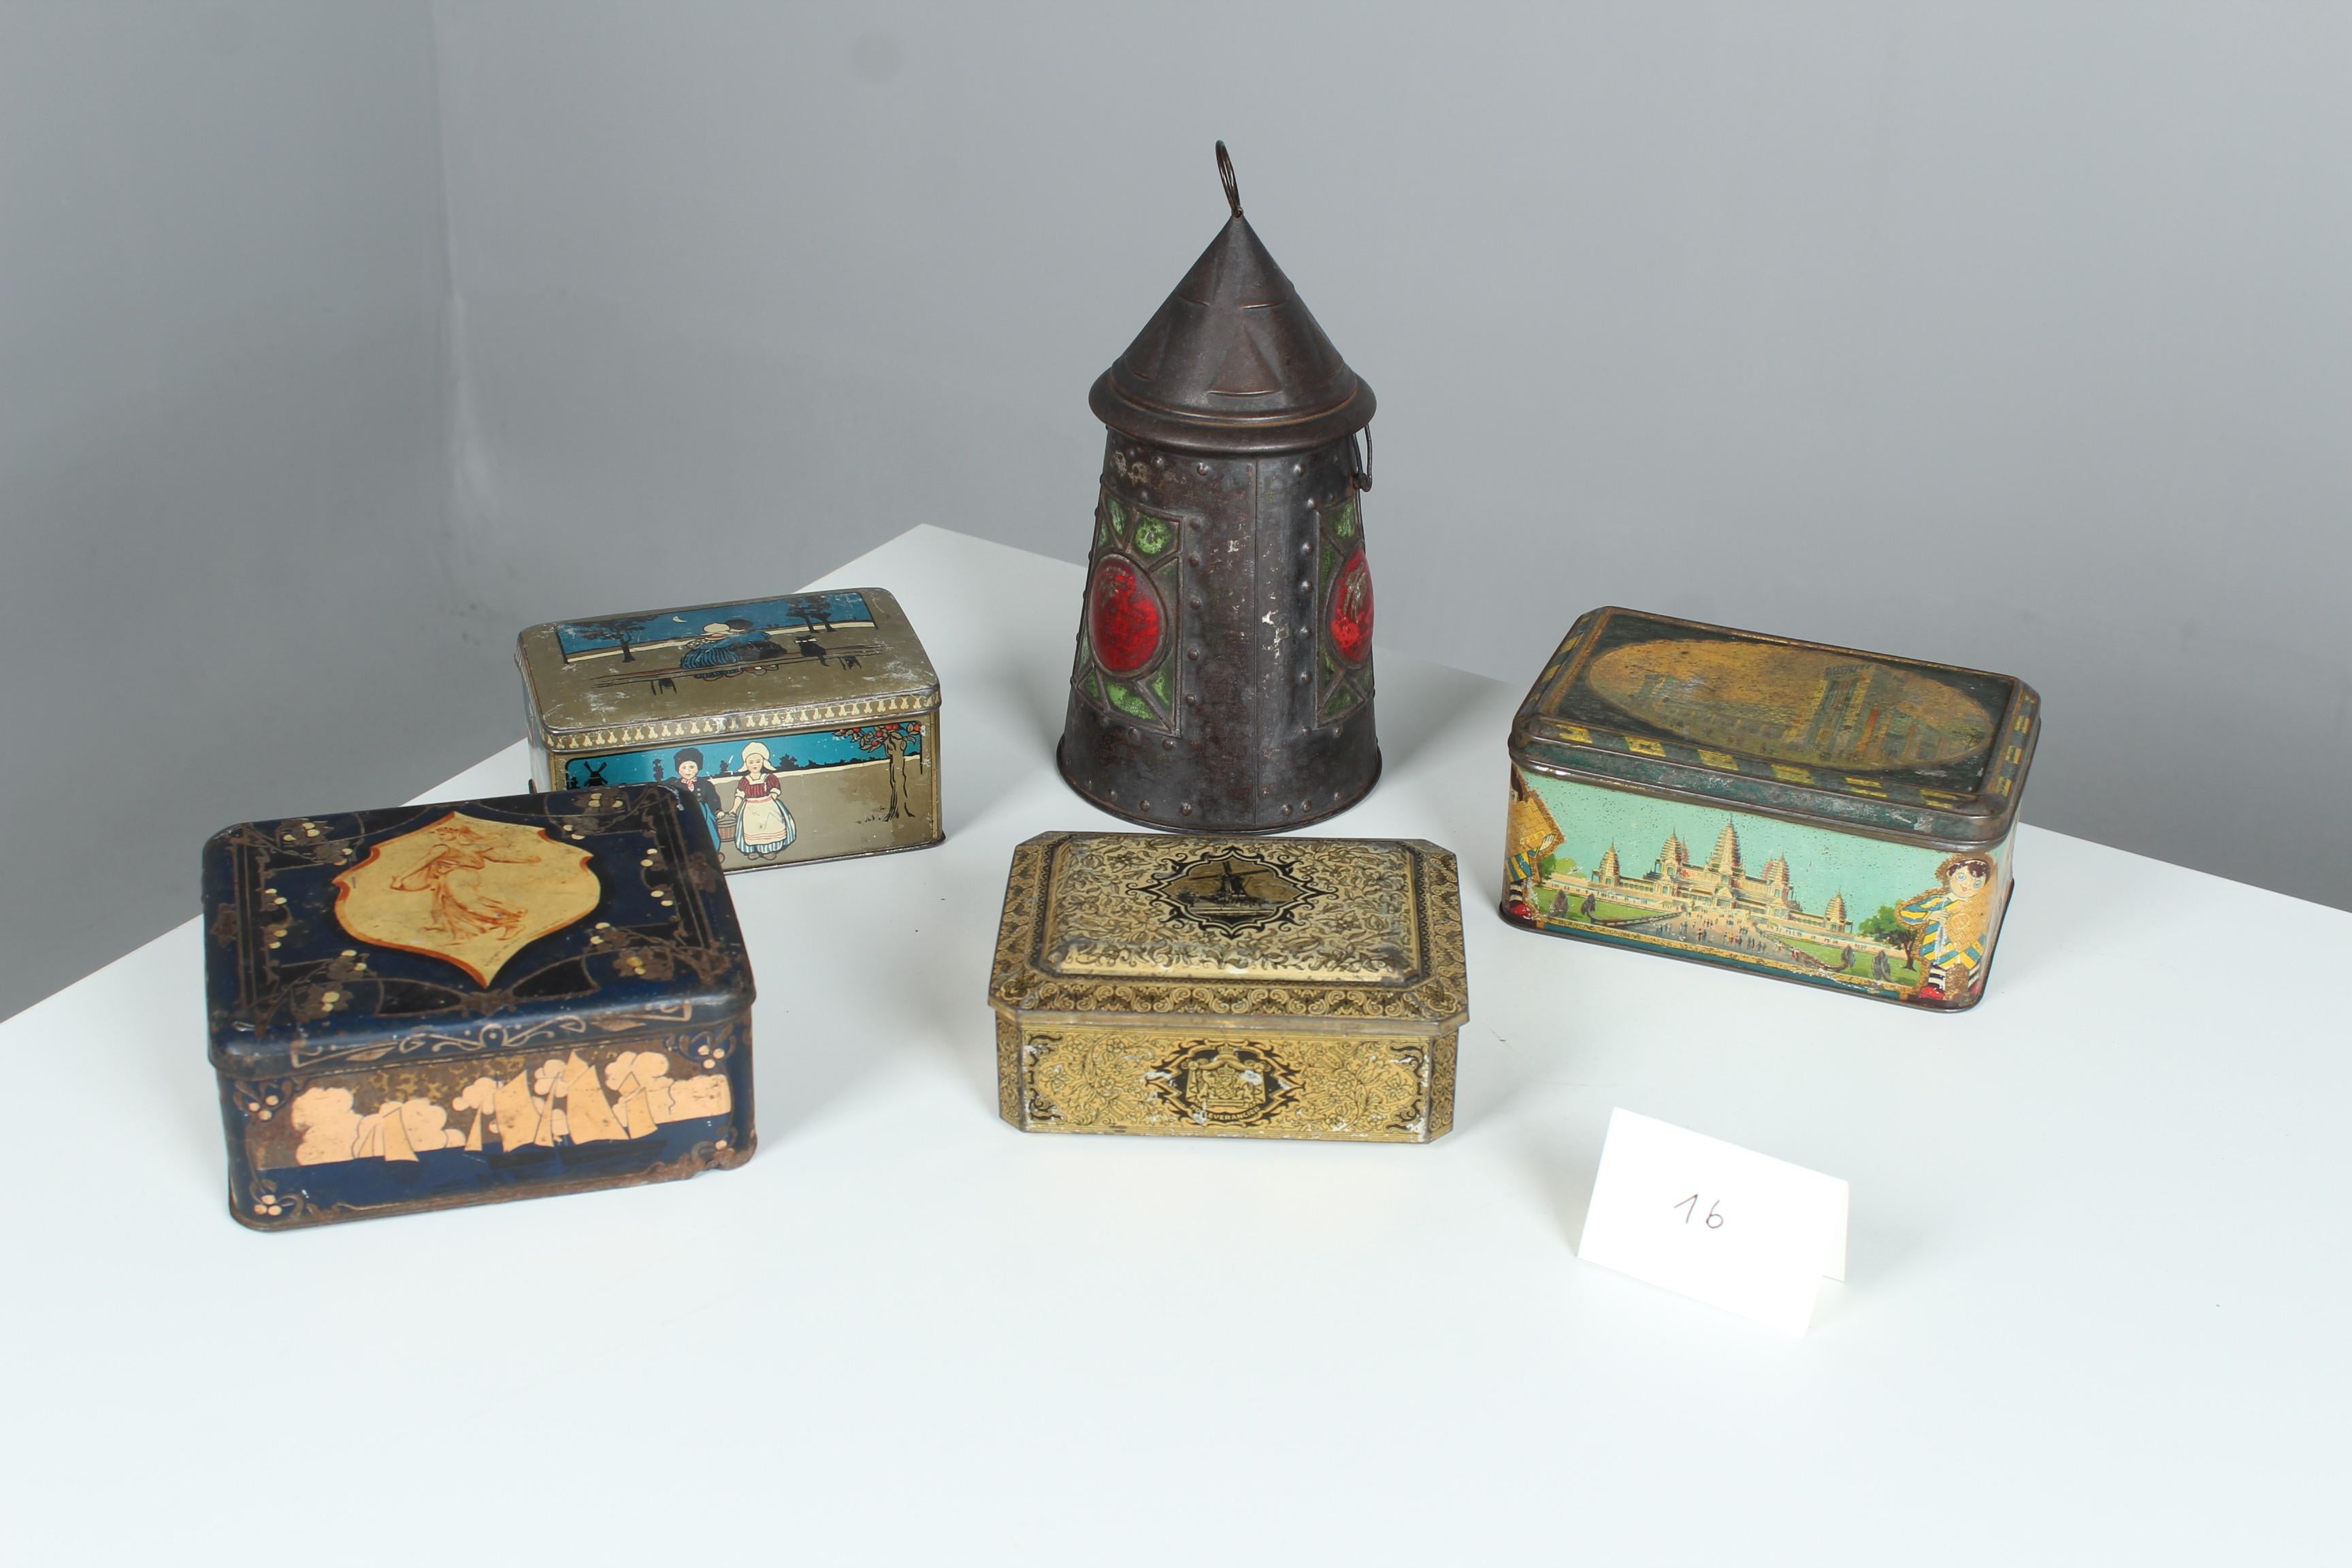 Set of 5 antique tin cookie cans from France.
